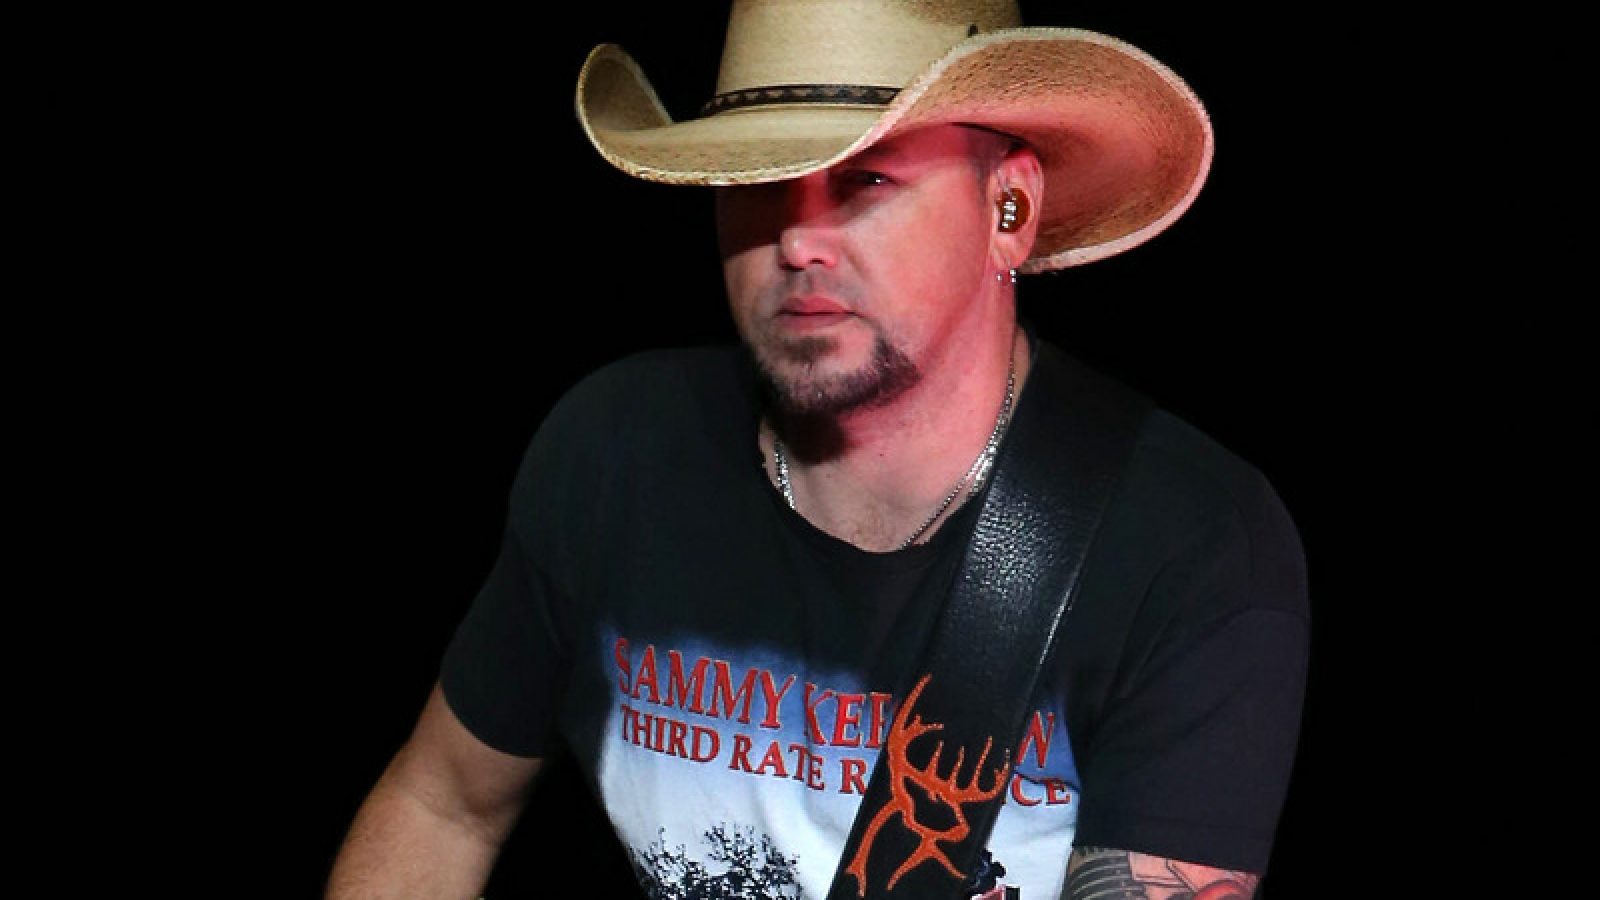 Jason Aldean With Kane Brown, Carly Pearce and Dee Jay Silver In Concert - Wantagh, NY